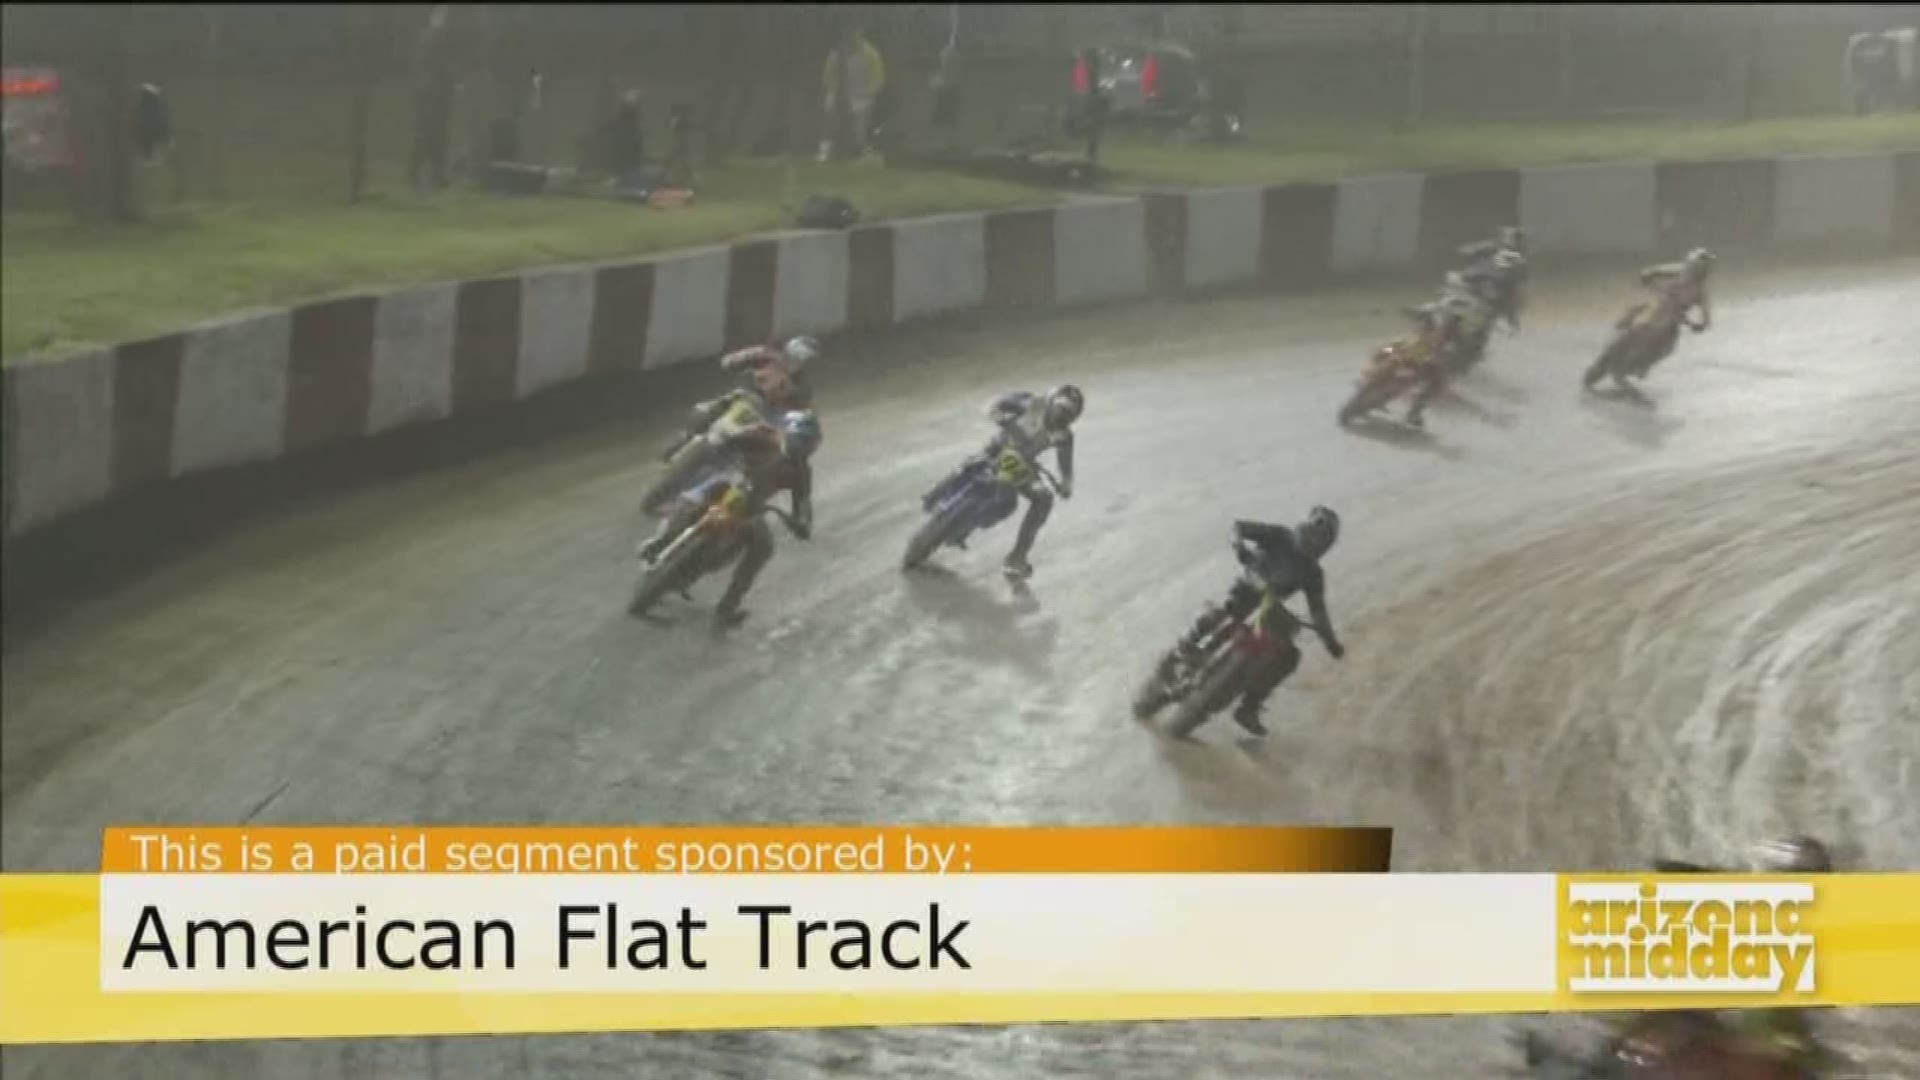 Professional Flat Track Racer Ryan Wells give us the scoop on what to expect at the races this weekend